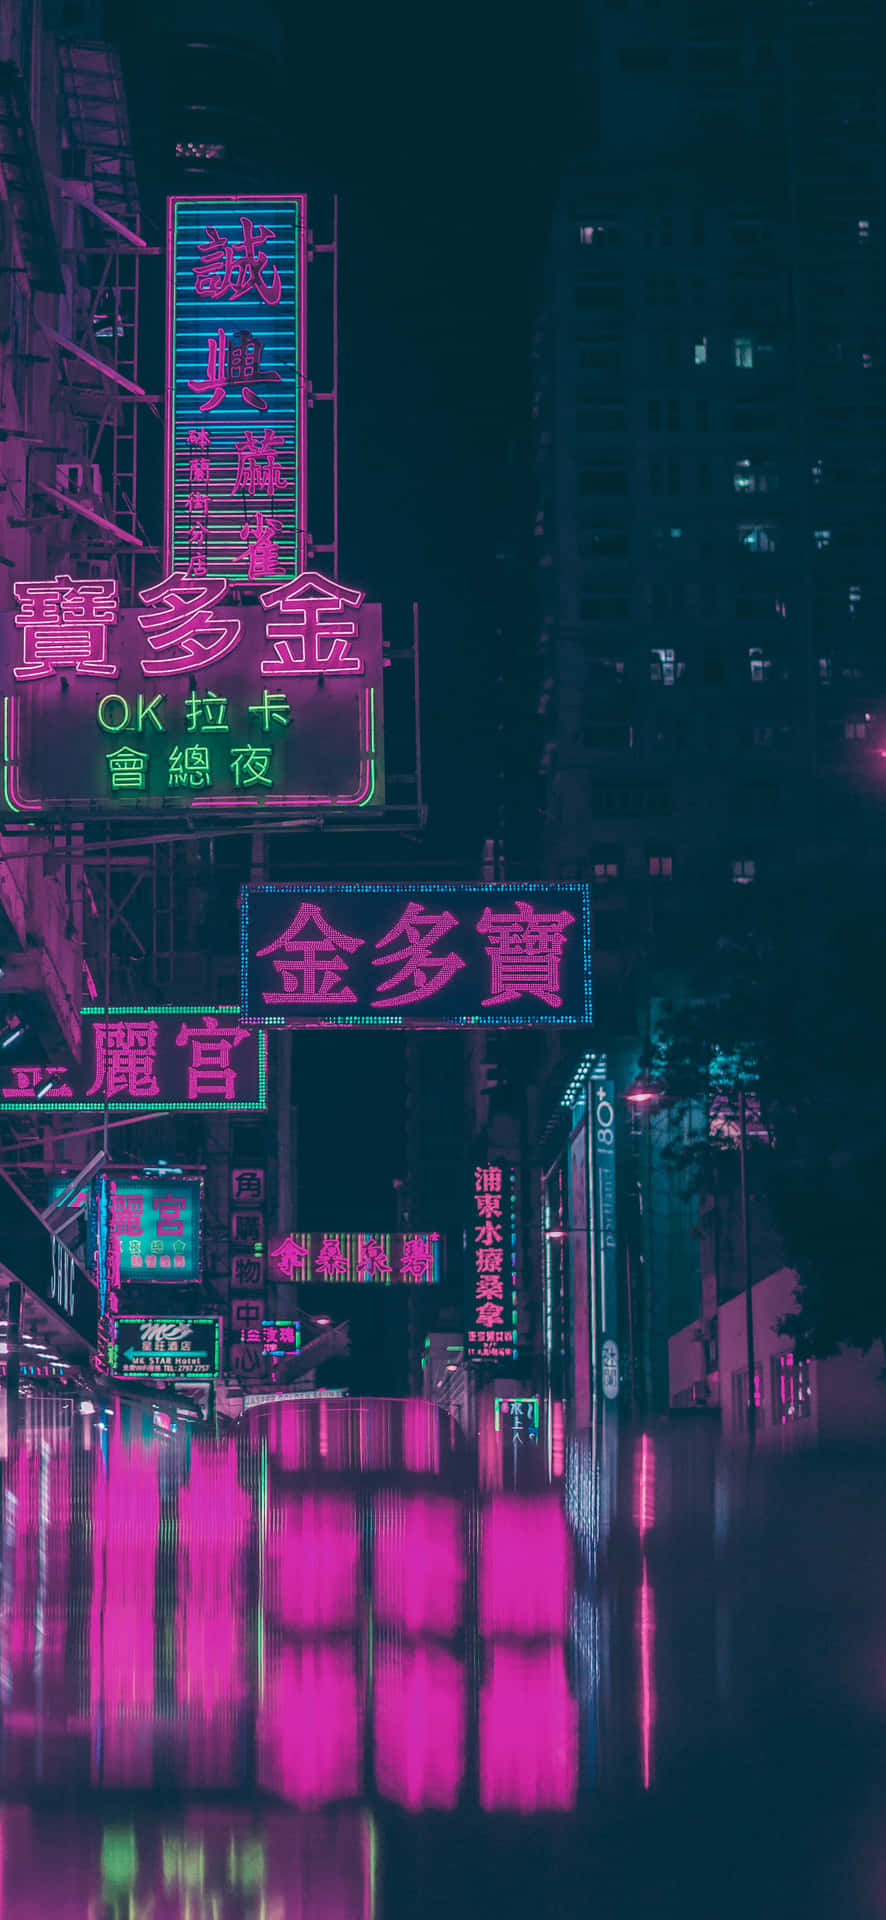 Download Neon Signs In A City At Night Wallpaper | Wallpapers.com